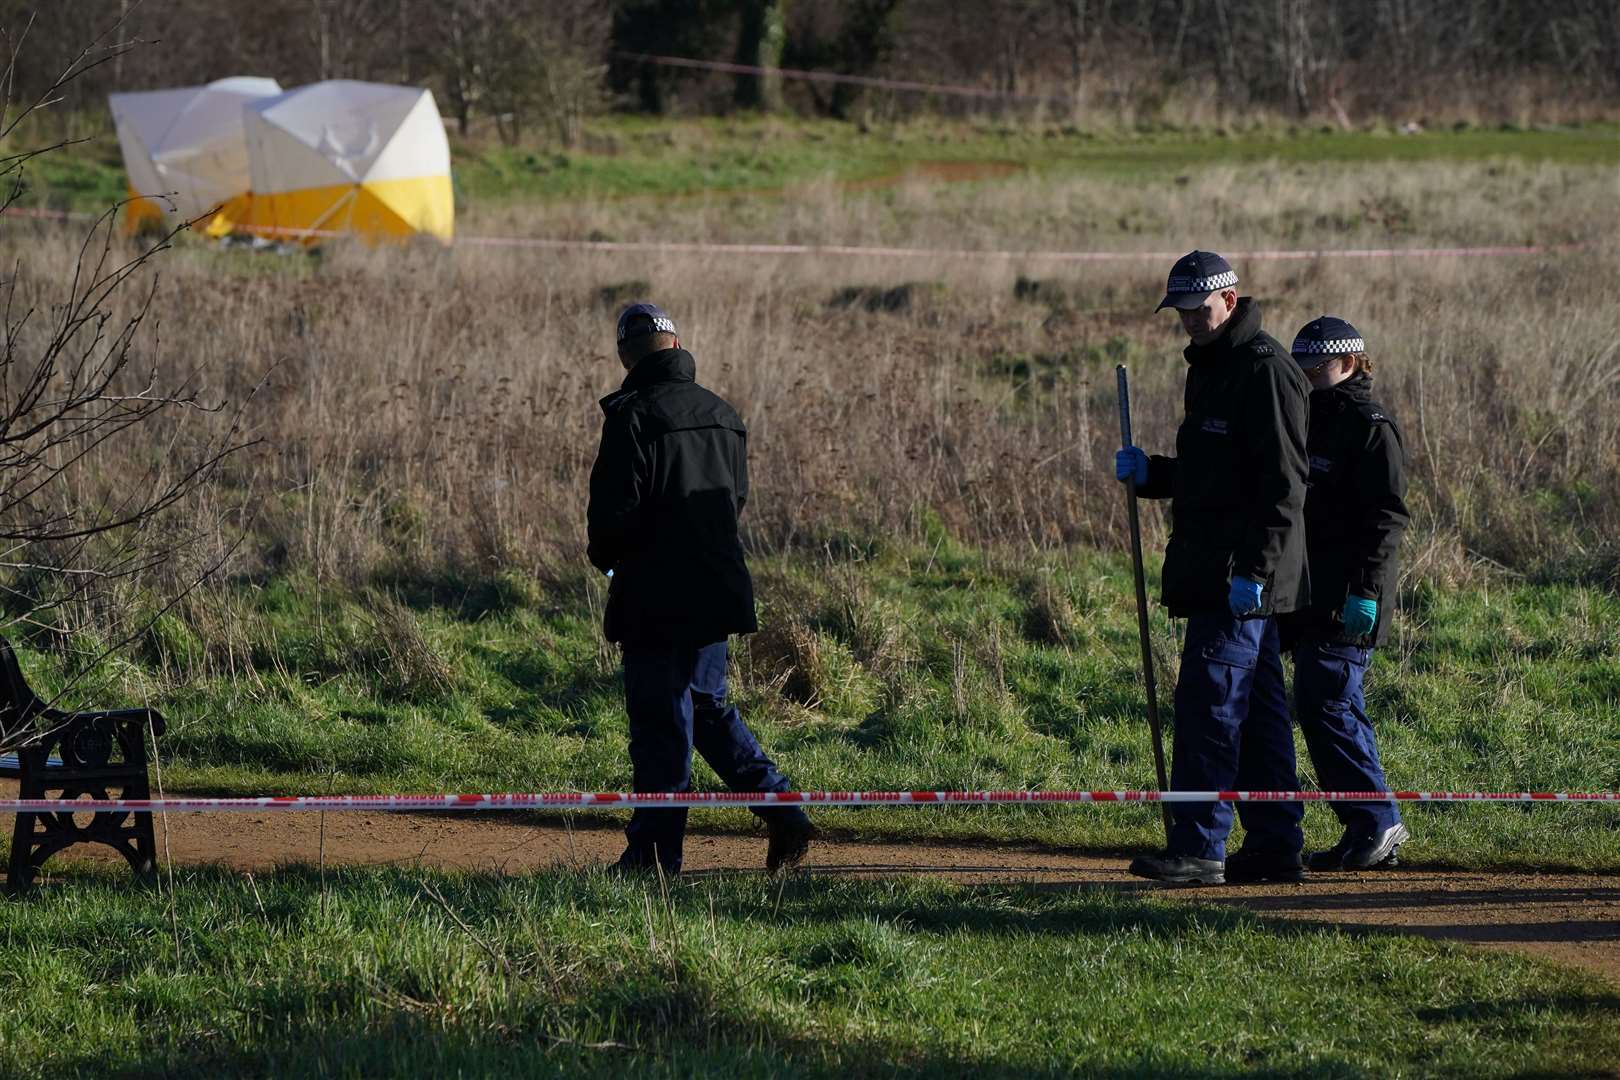 Forensic tents and a police search team carried out investigations at the scene (Jonathan Brady/PA)